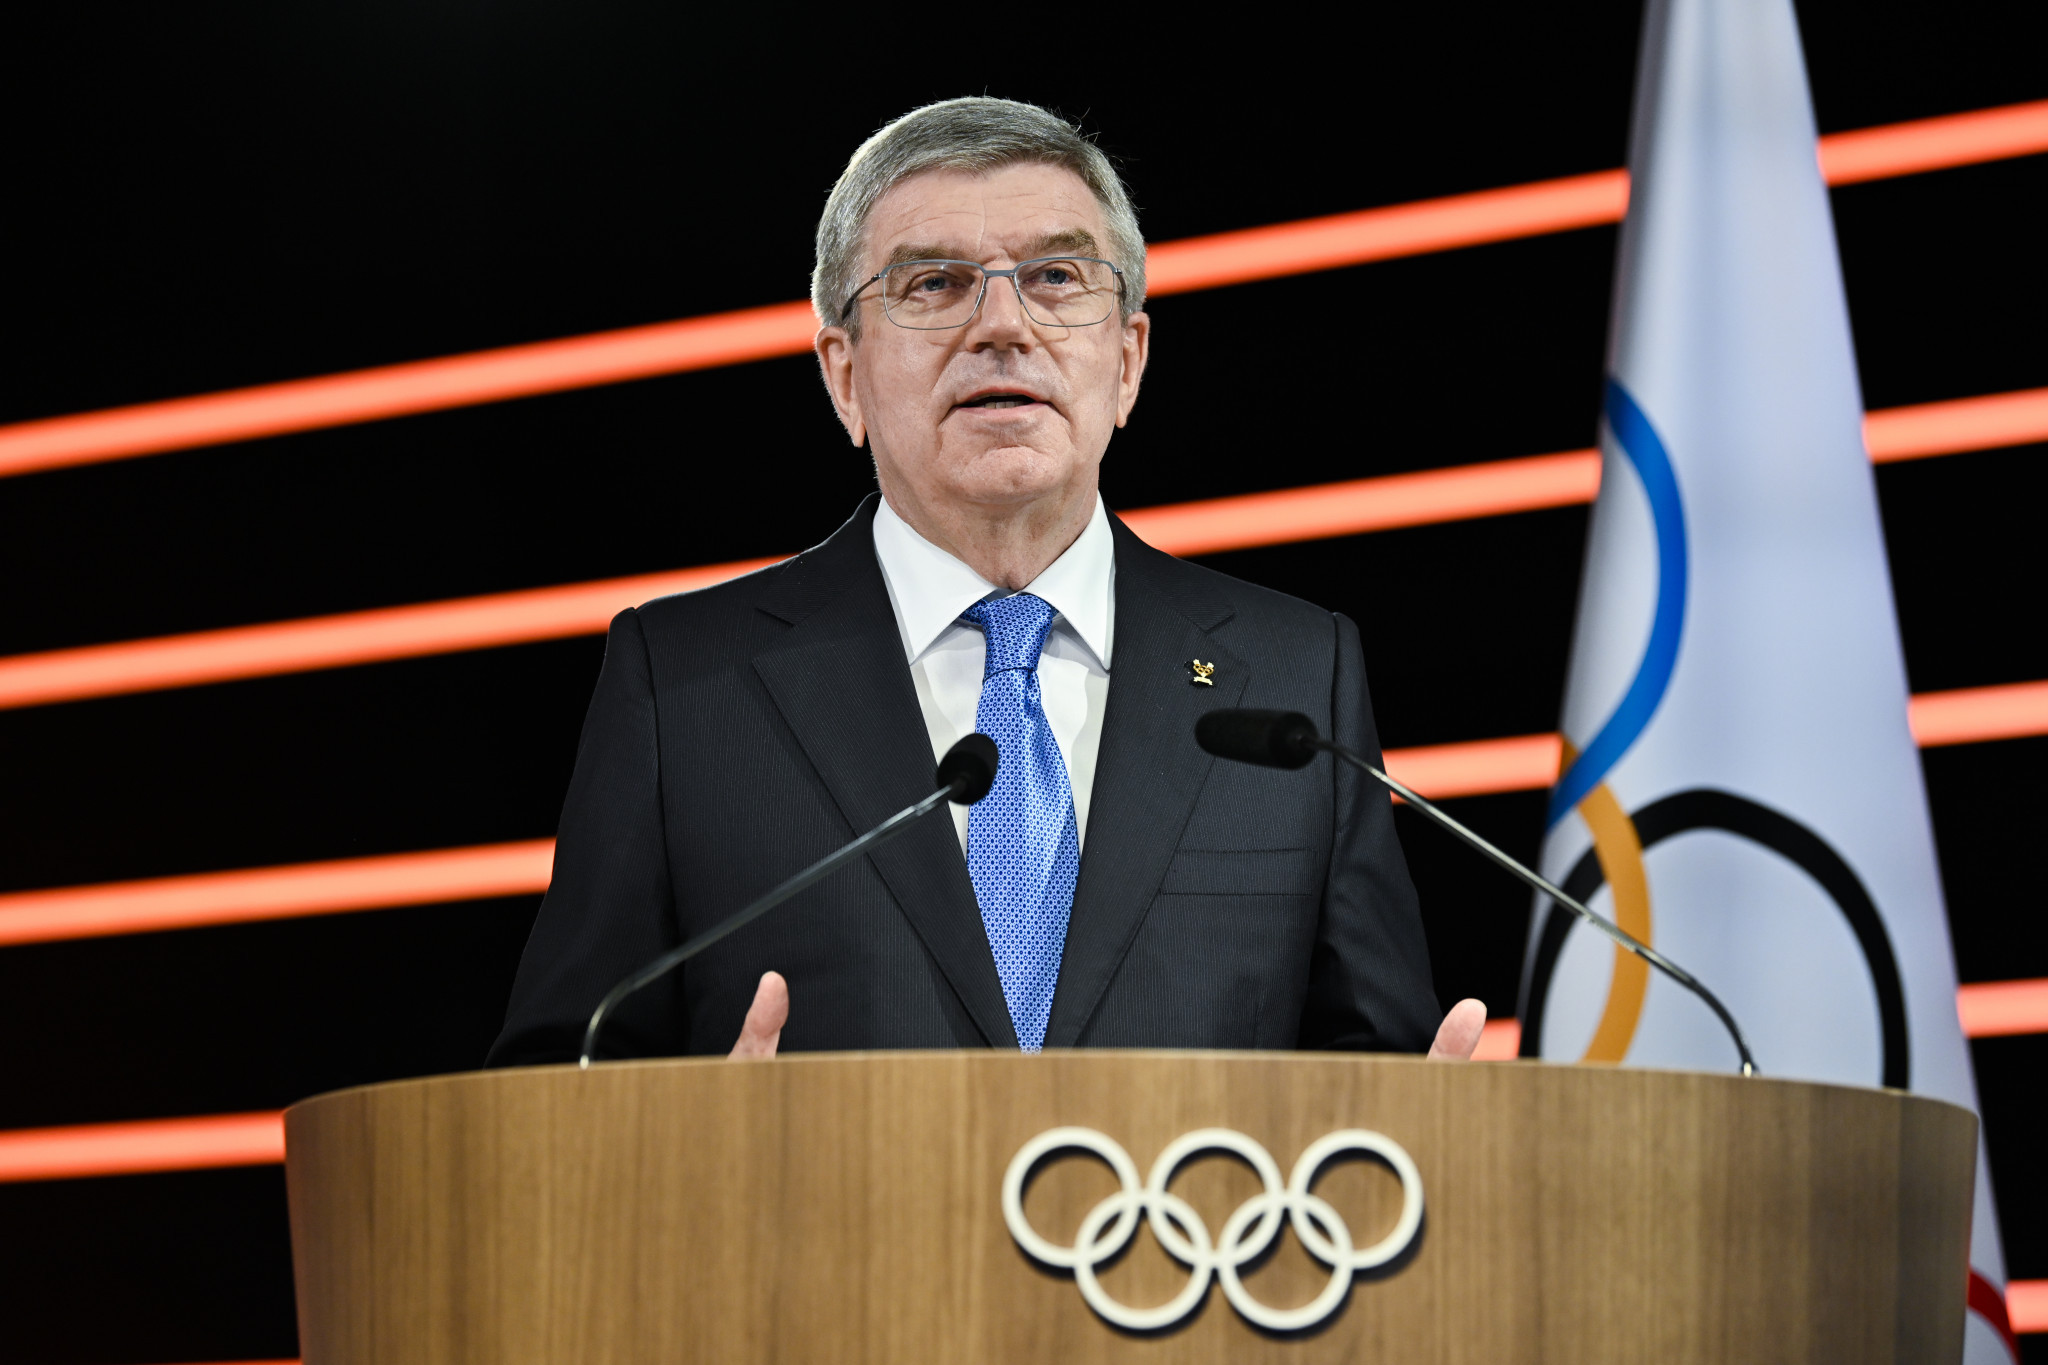 IOC President Thomas Bach said after last month's IOC Session that the organisation is 